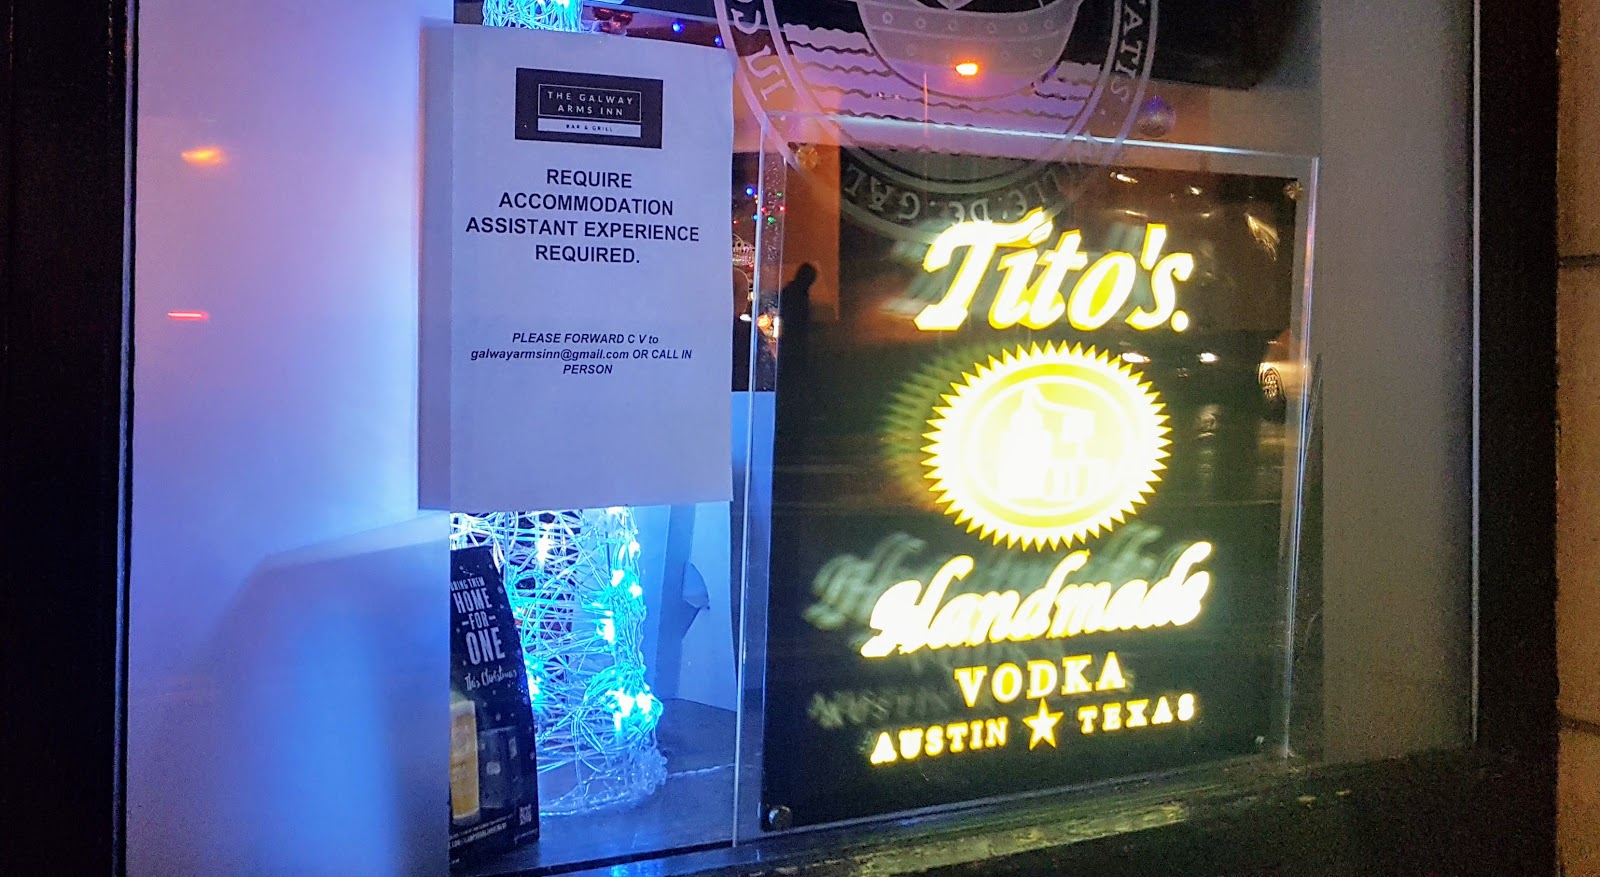 Accommodation assistant and illuminated sign for tito's handmade vodka